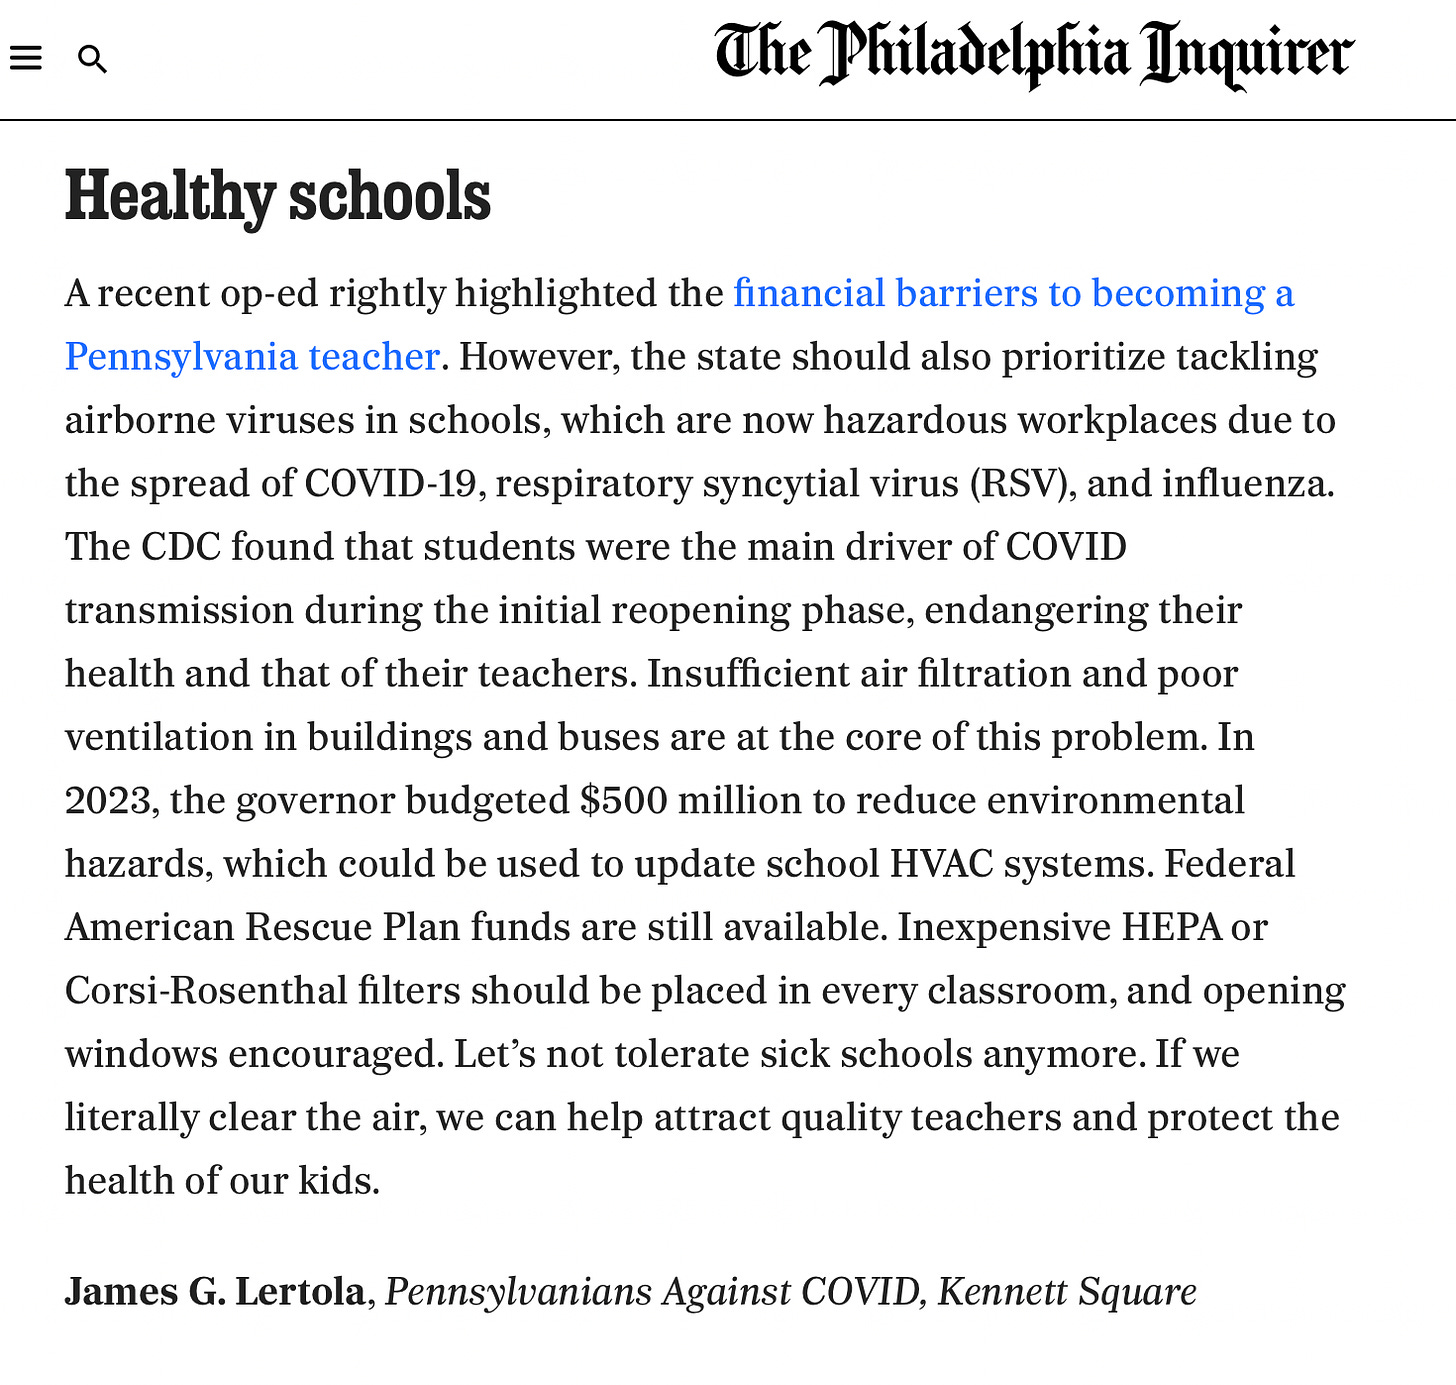 Newspaper clipping: The Philadelphia Inquirer. Healthy schools. A recent op-ed rightly highlighted the financial barriers to becoming a Pennsylvania teacher. However, the state should also prioritize tackling airborne viruses in schools, which are now hazardous workplaces due to the spread of COVID-19, respiratory syncytial virus (RSV), and influenza. The CDC found that students were the main driver of COVID transmission during the initial reopening phase, endangering their health and that of their teachers. Insufficient air filtration and poor ventilation in buildings and buses are at the core of this problem. In 2023, the governor budgeted $500 million to reduce environmental hazards, which could be used to update school HVAC systems. Federal American Rescue Plan funds are still available. Inexpensive HEPA or Corsi-Rosenthal filters should be placed in every classroom, and opening windows encouraged. Let's not tolerate sick schools anymore. If we literally clear the air, we can help attract quality teachers and protect the health of our kids. James G. Lertola, Pennsylvanians Against COVID, Kennett Square